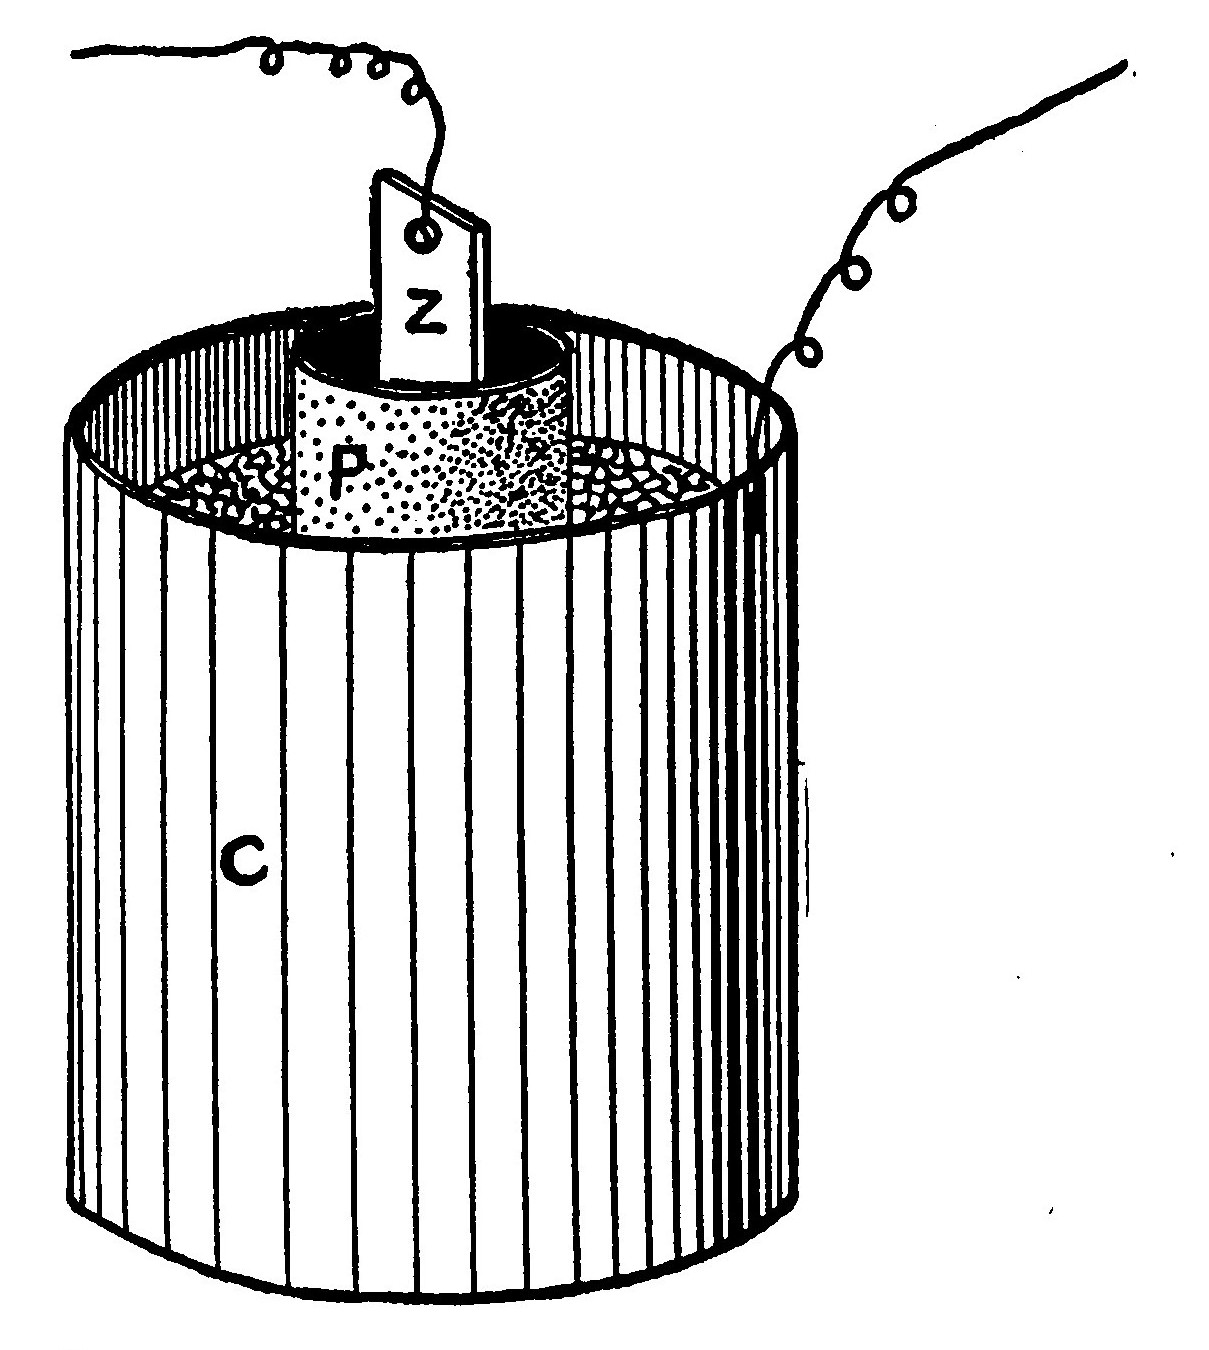 Fig. 68.—The Tomato-Can Cell Complete.